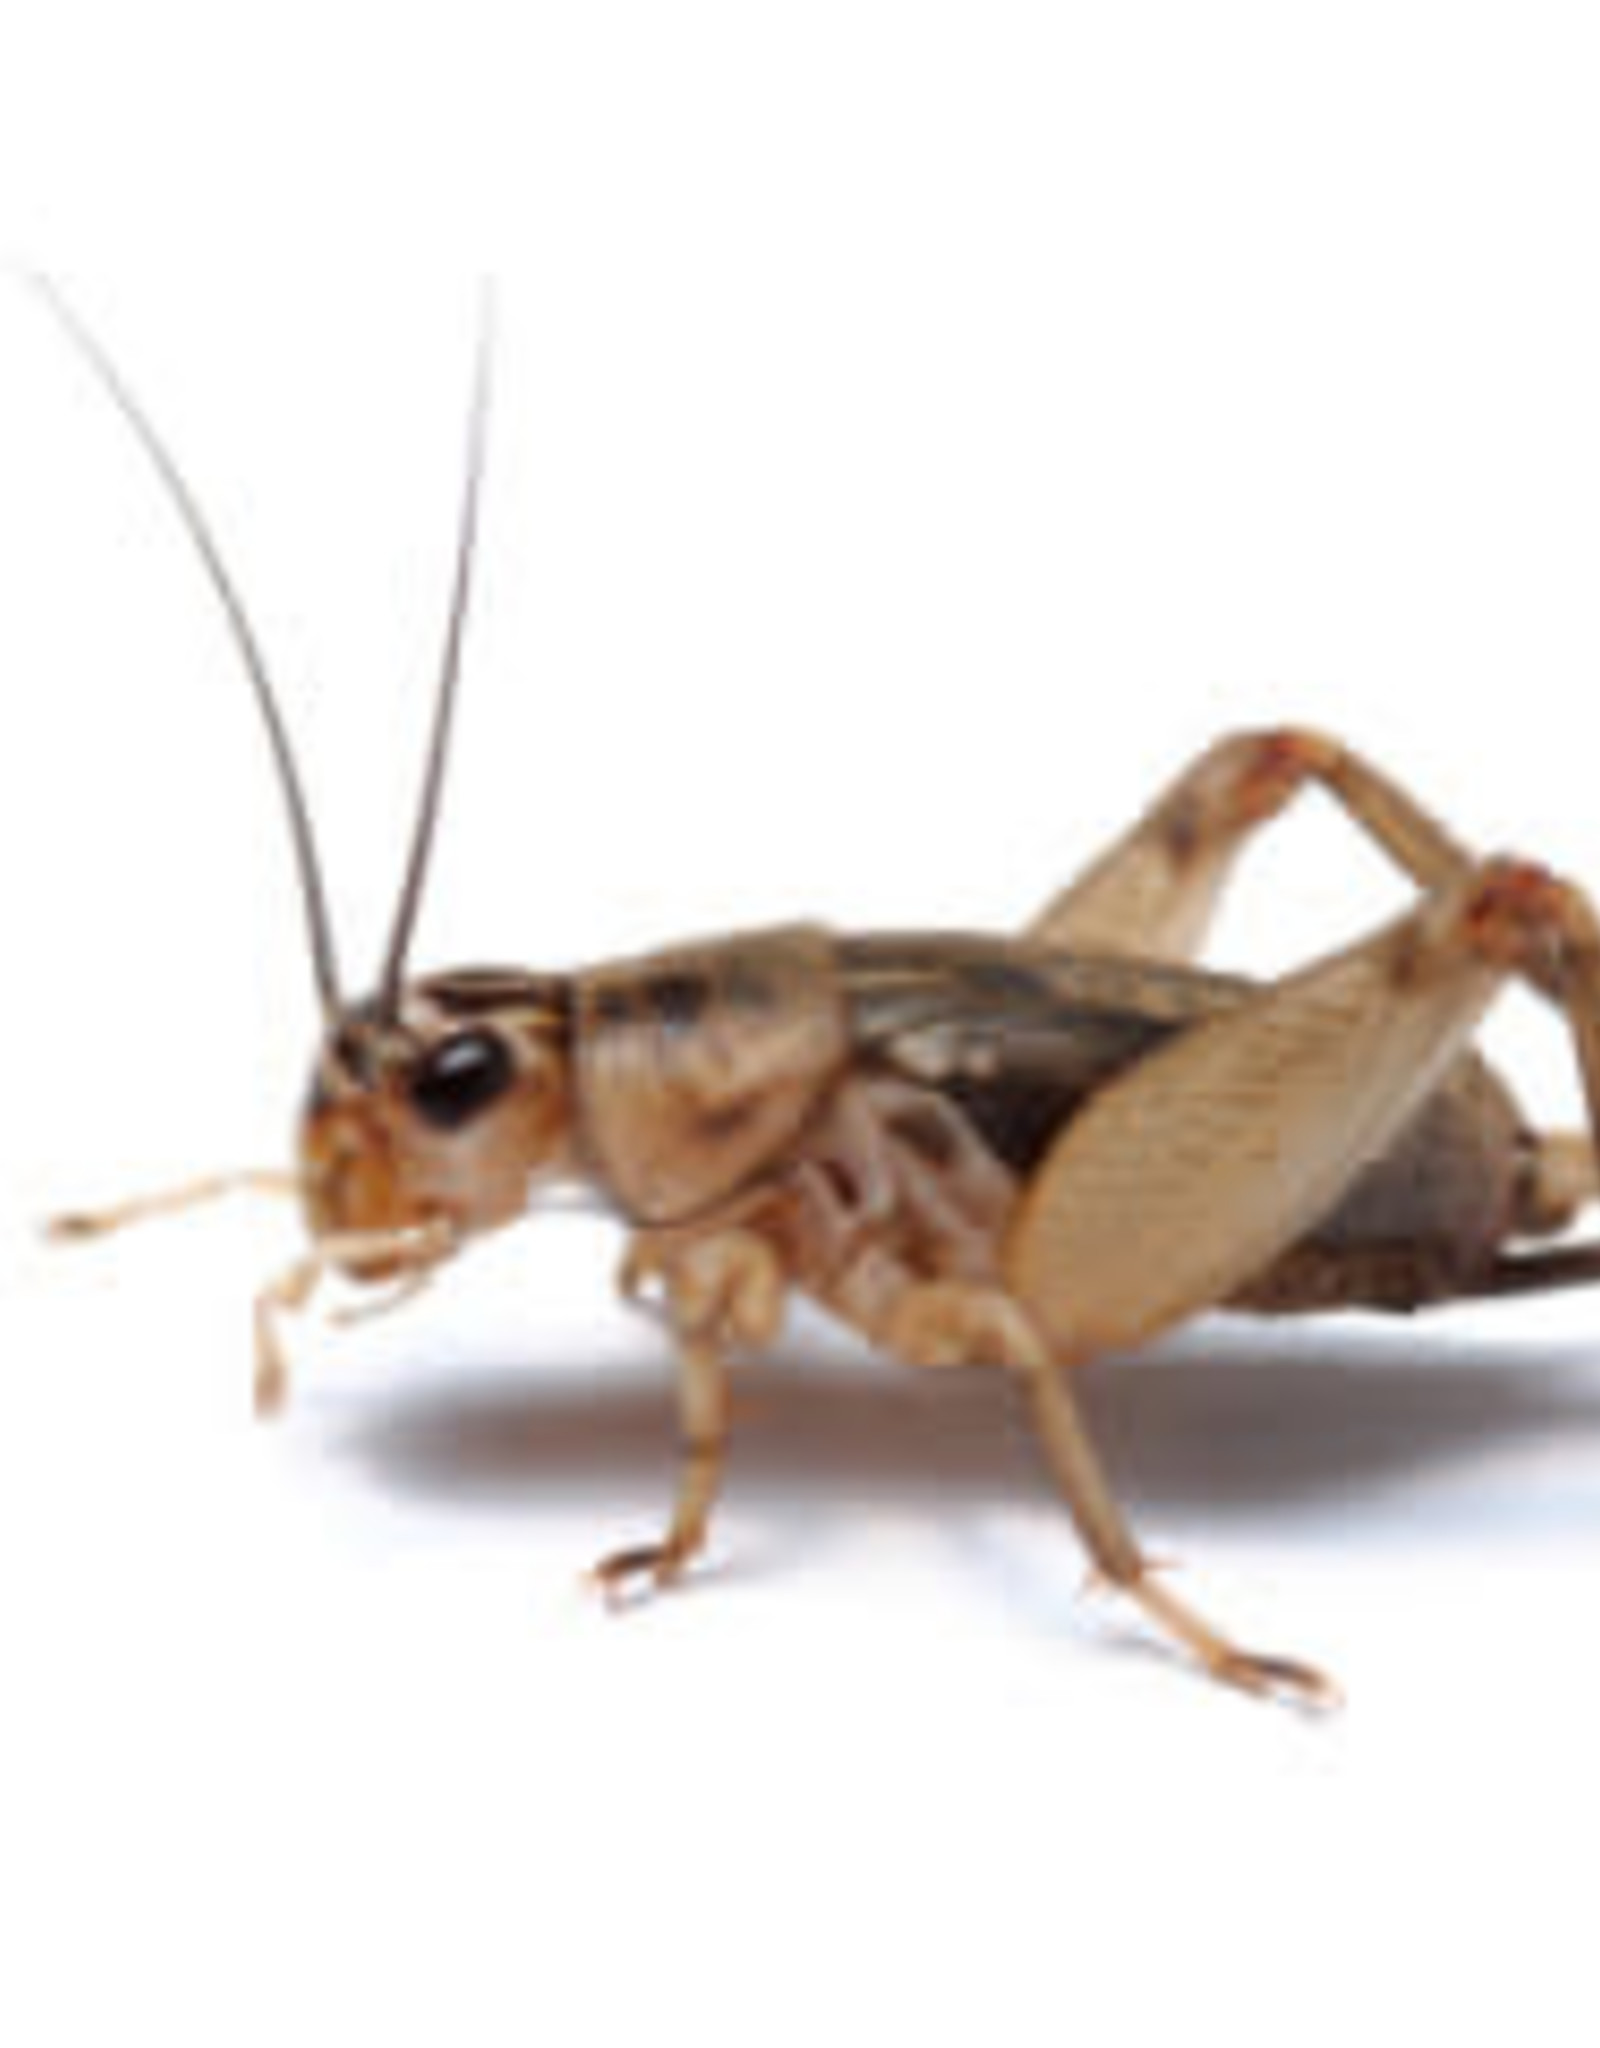 LIVE- CRICKETS- PREORDER- LOCAL PICK UP- 1000 COUNT